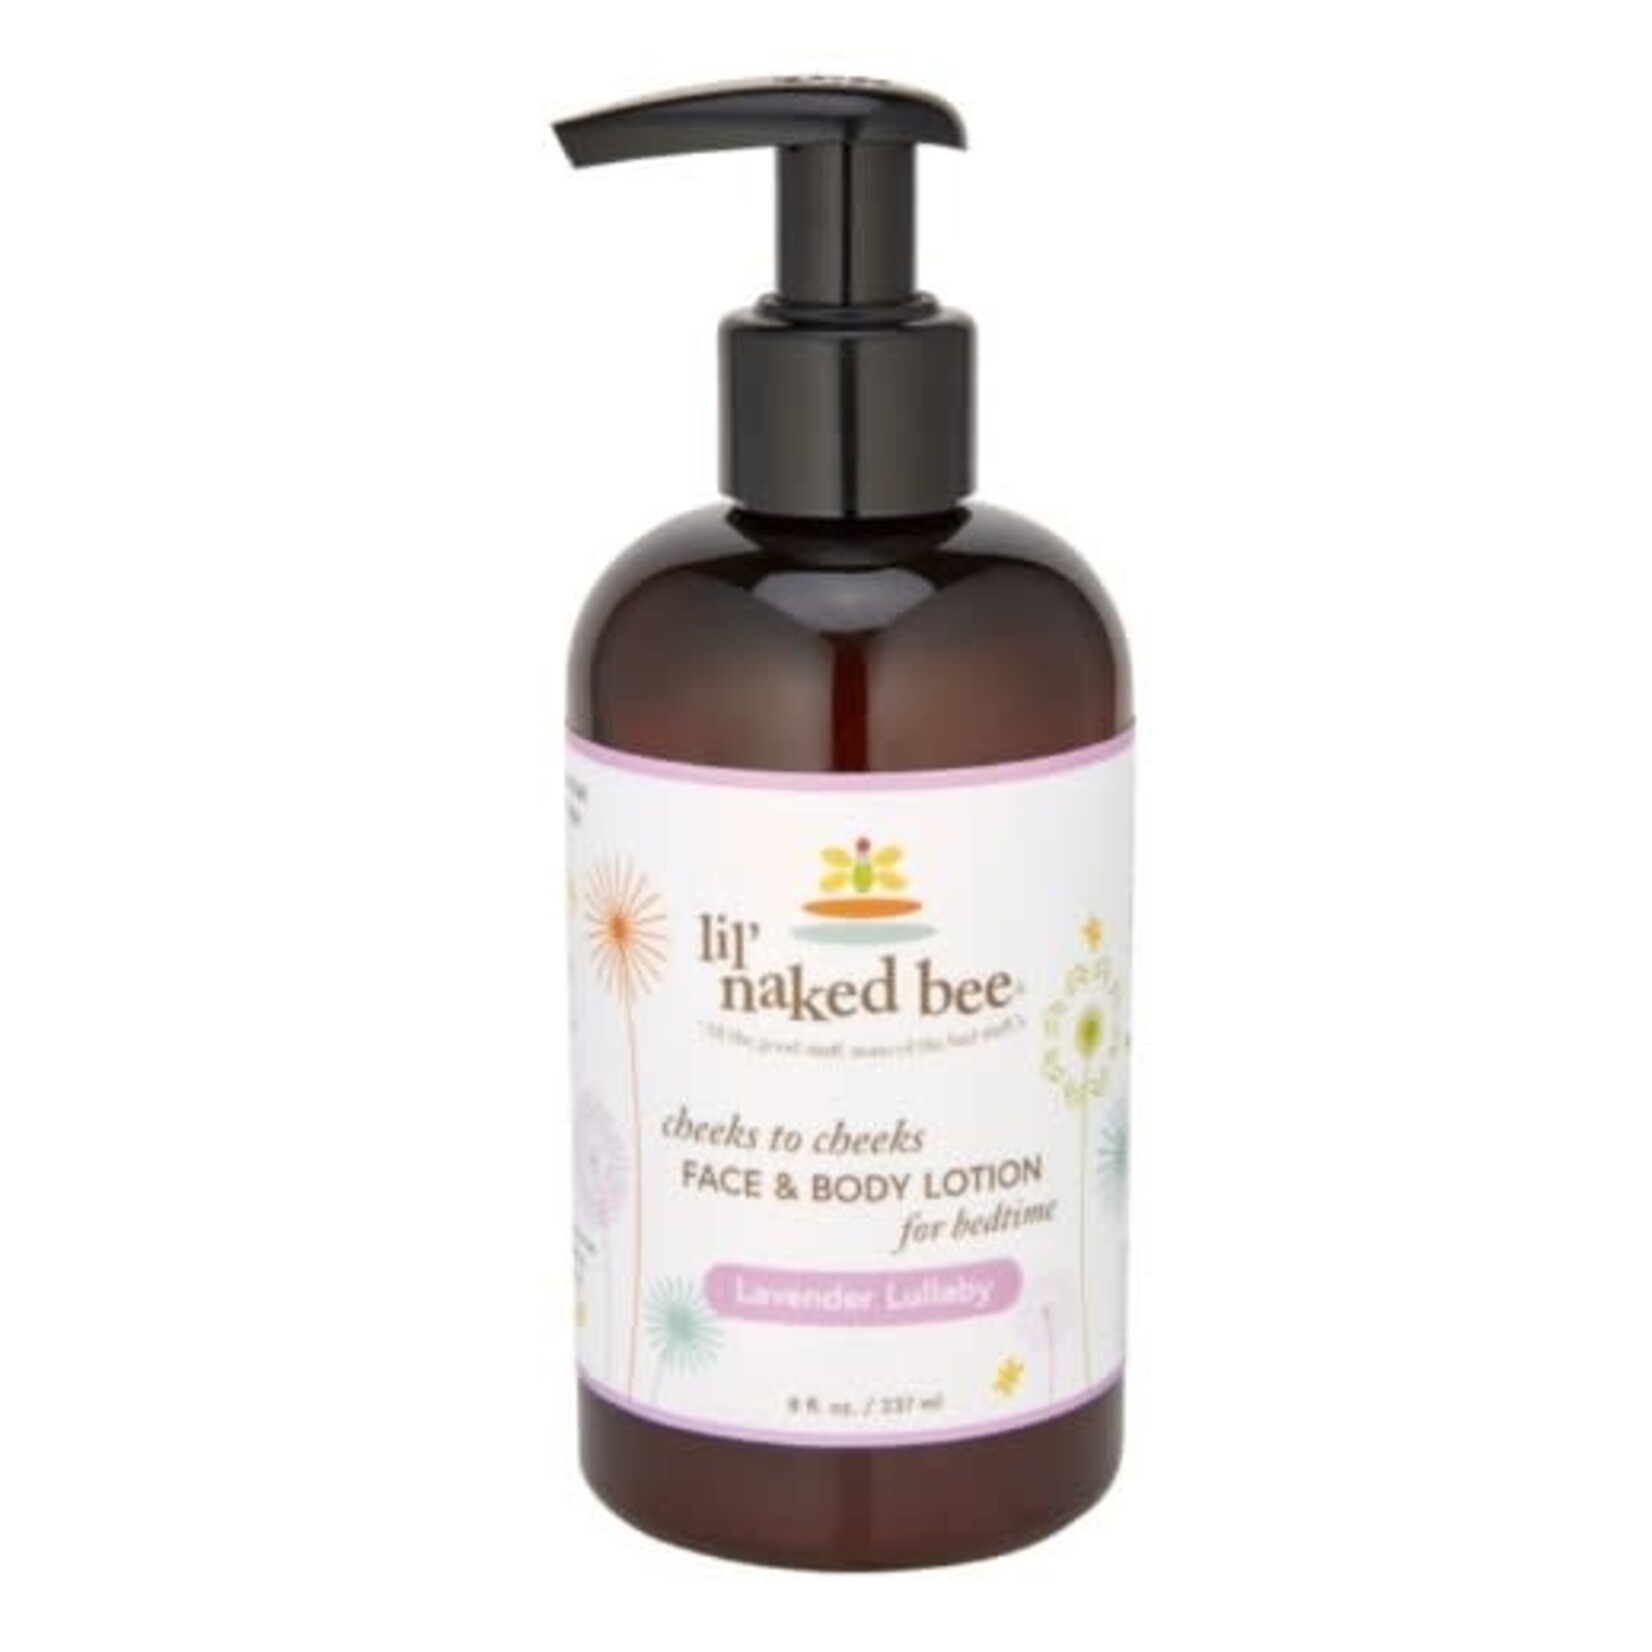 The Naked Bee Lil' Naked Bee Face & Body Lotion Lavender Lullaby